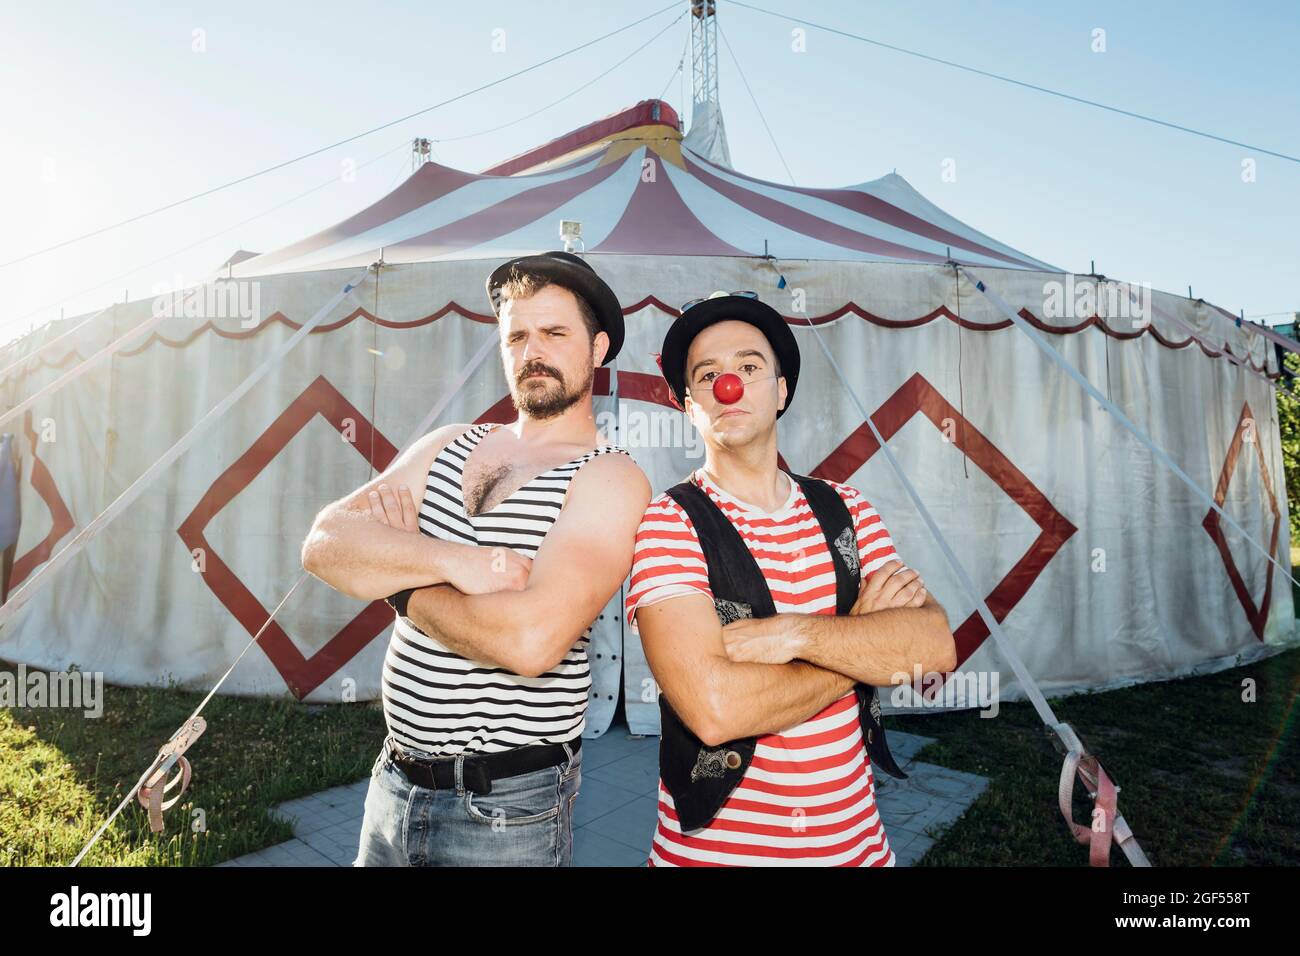 Muscular build artist standing with arms crossed by clown in front of circus tent Stock Photo